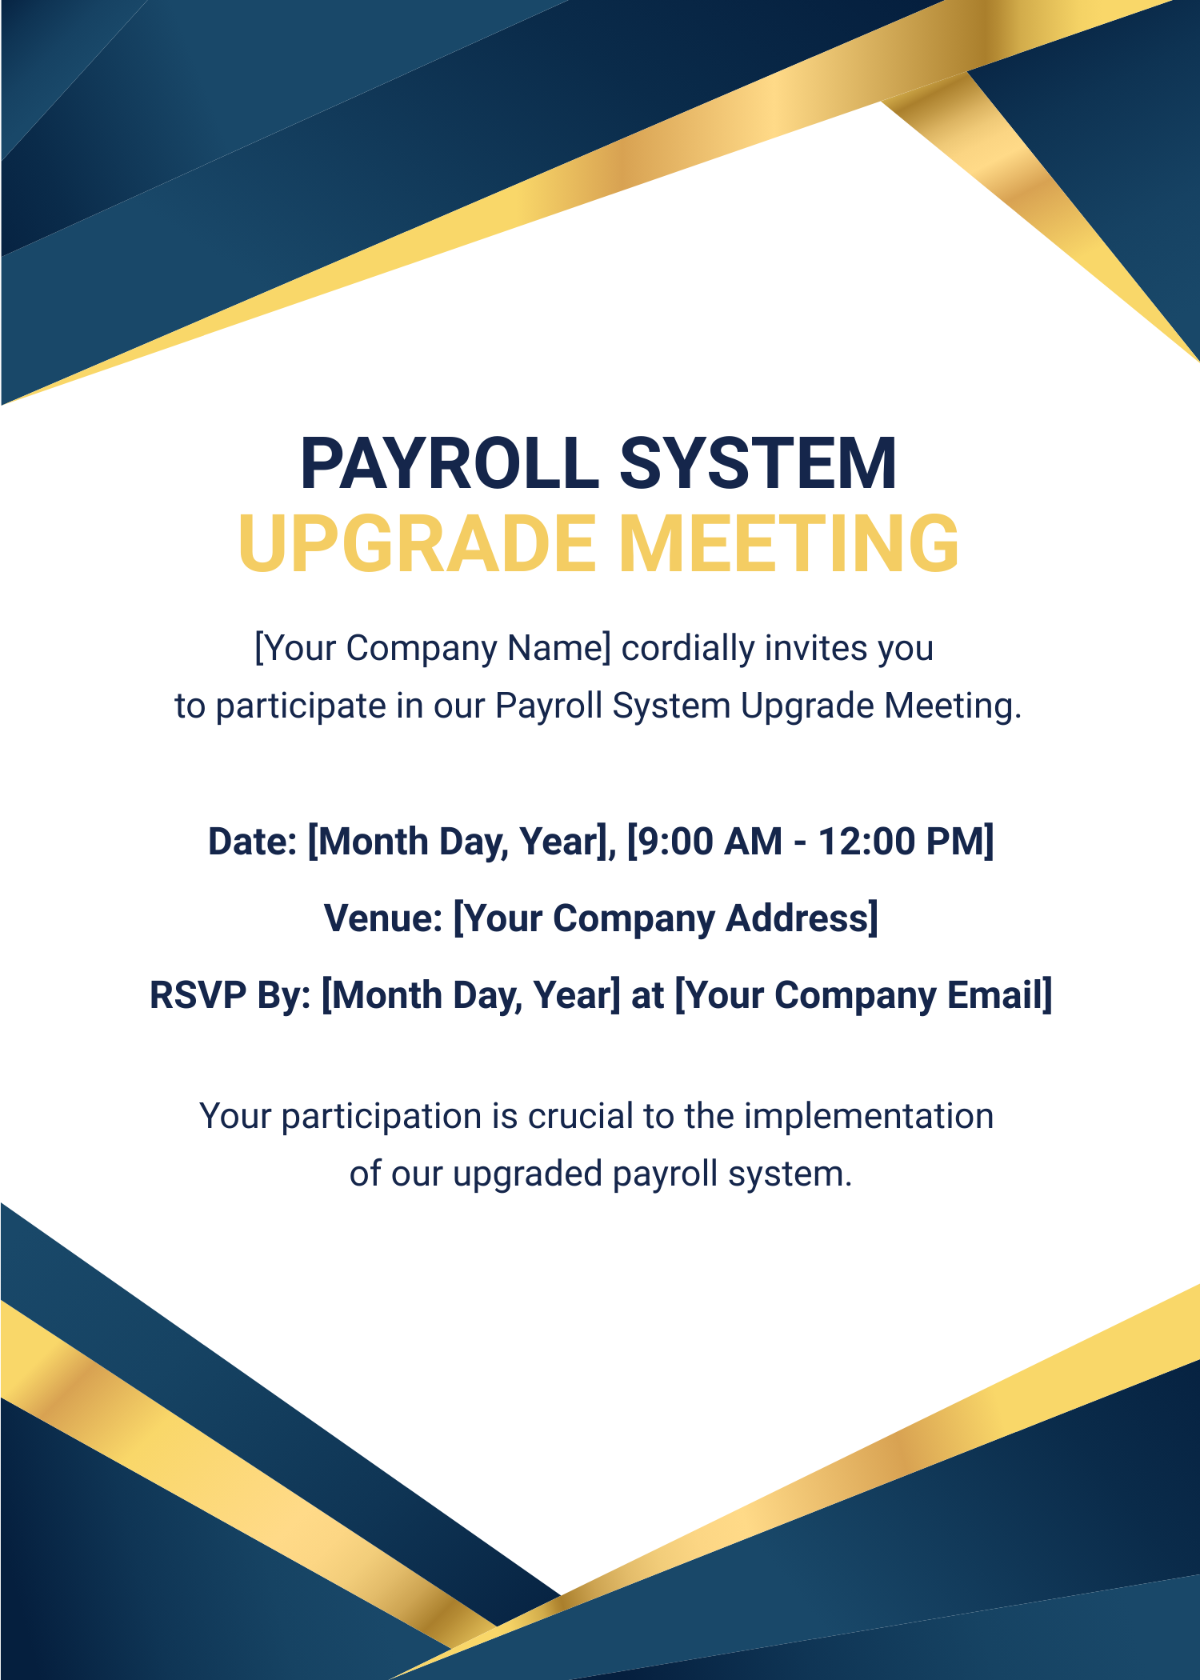 Payroll System Upgrade Meeting Invitation Card Template